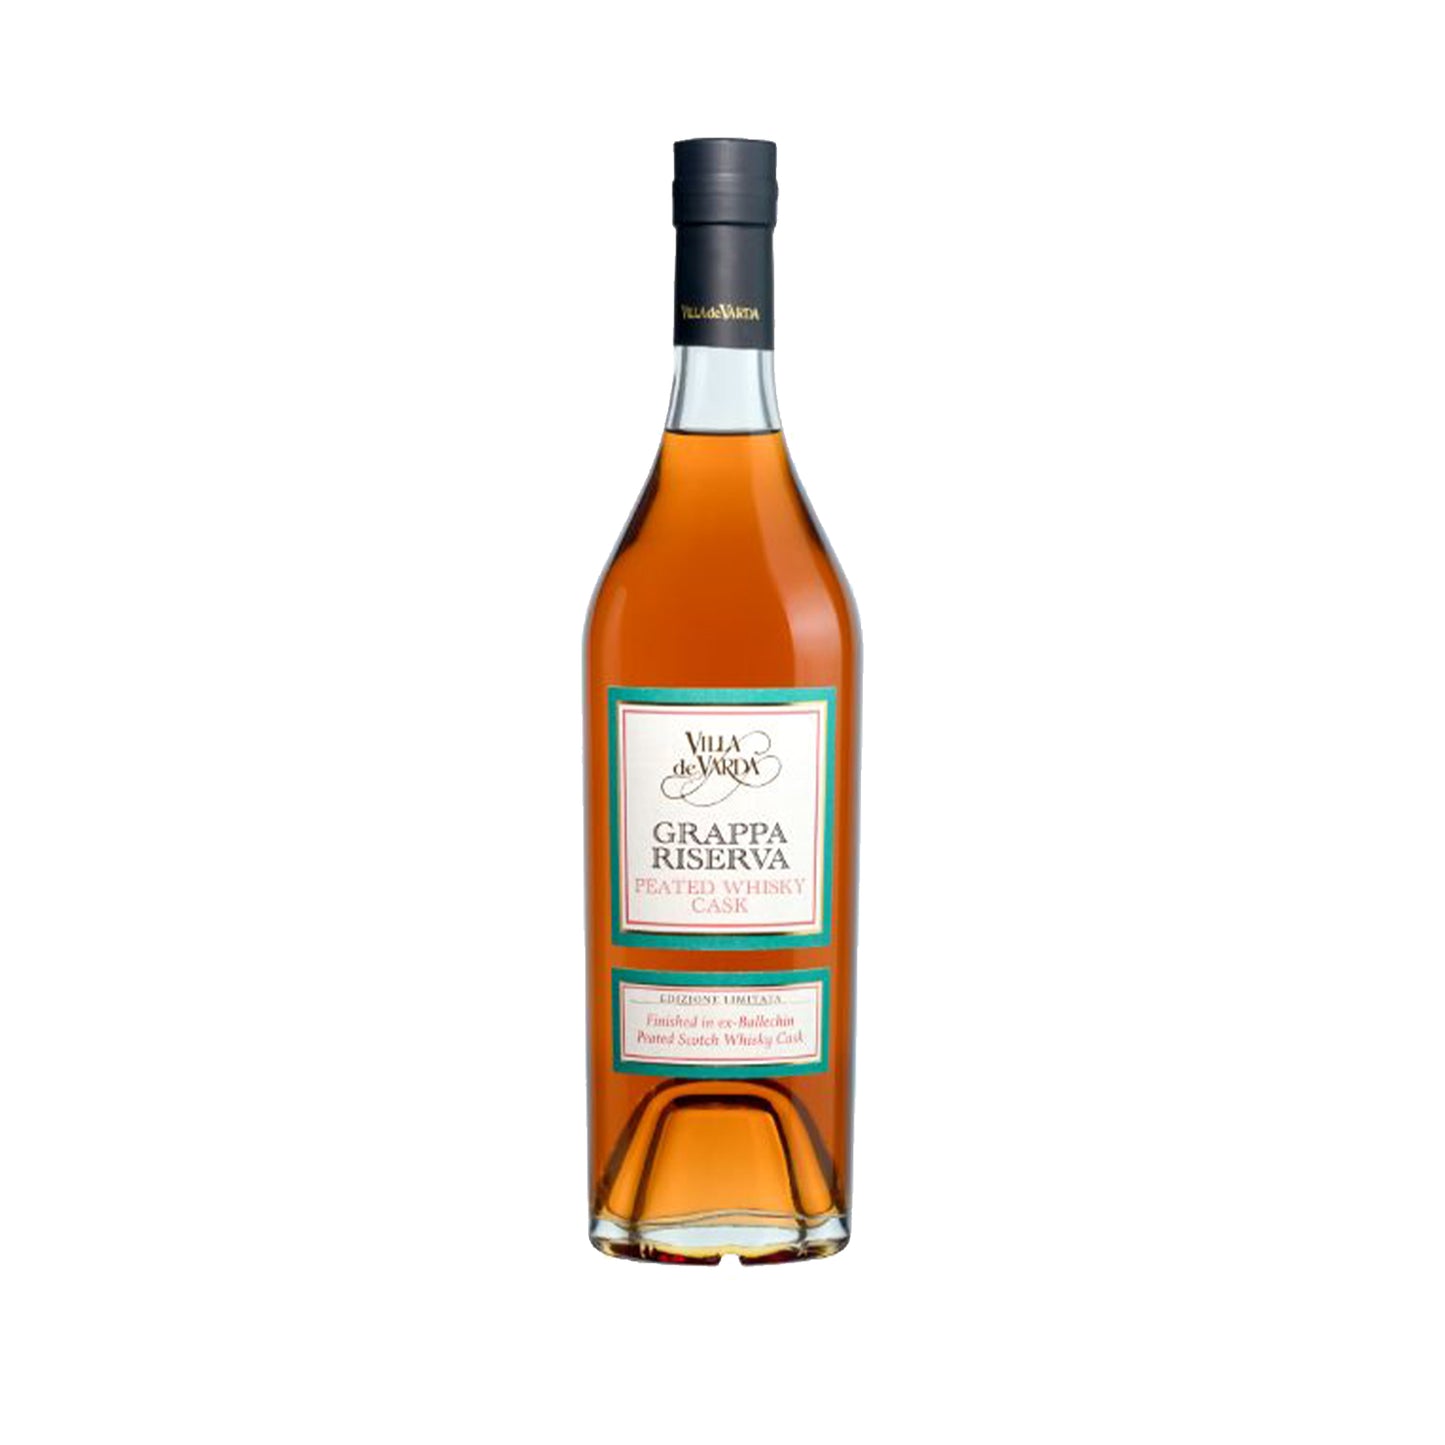 Grappa Riserva Peated Whisky Cask